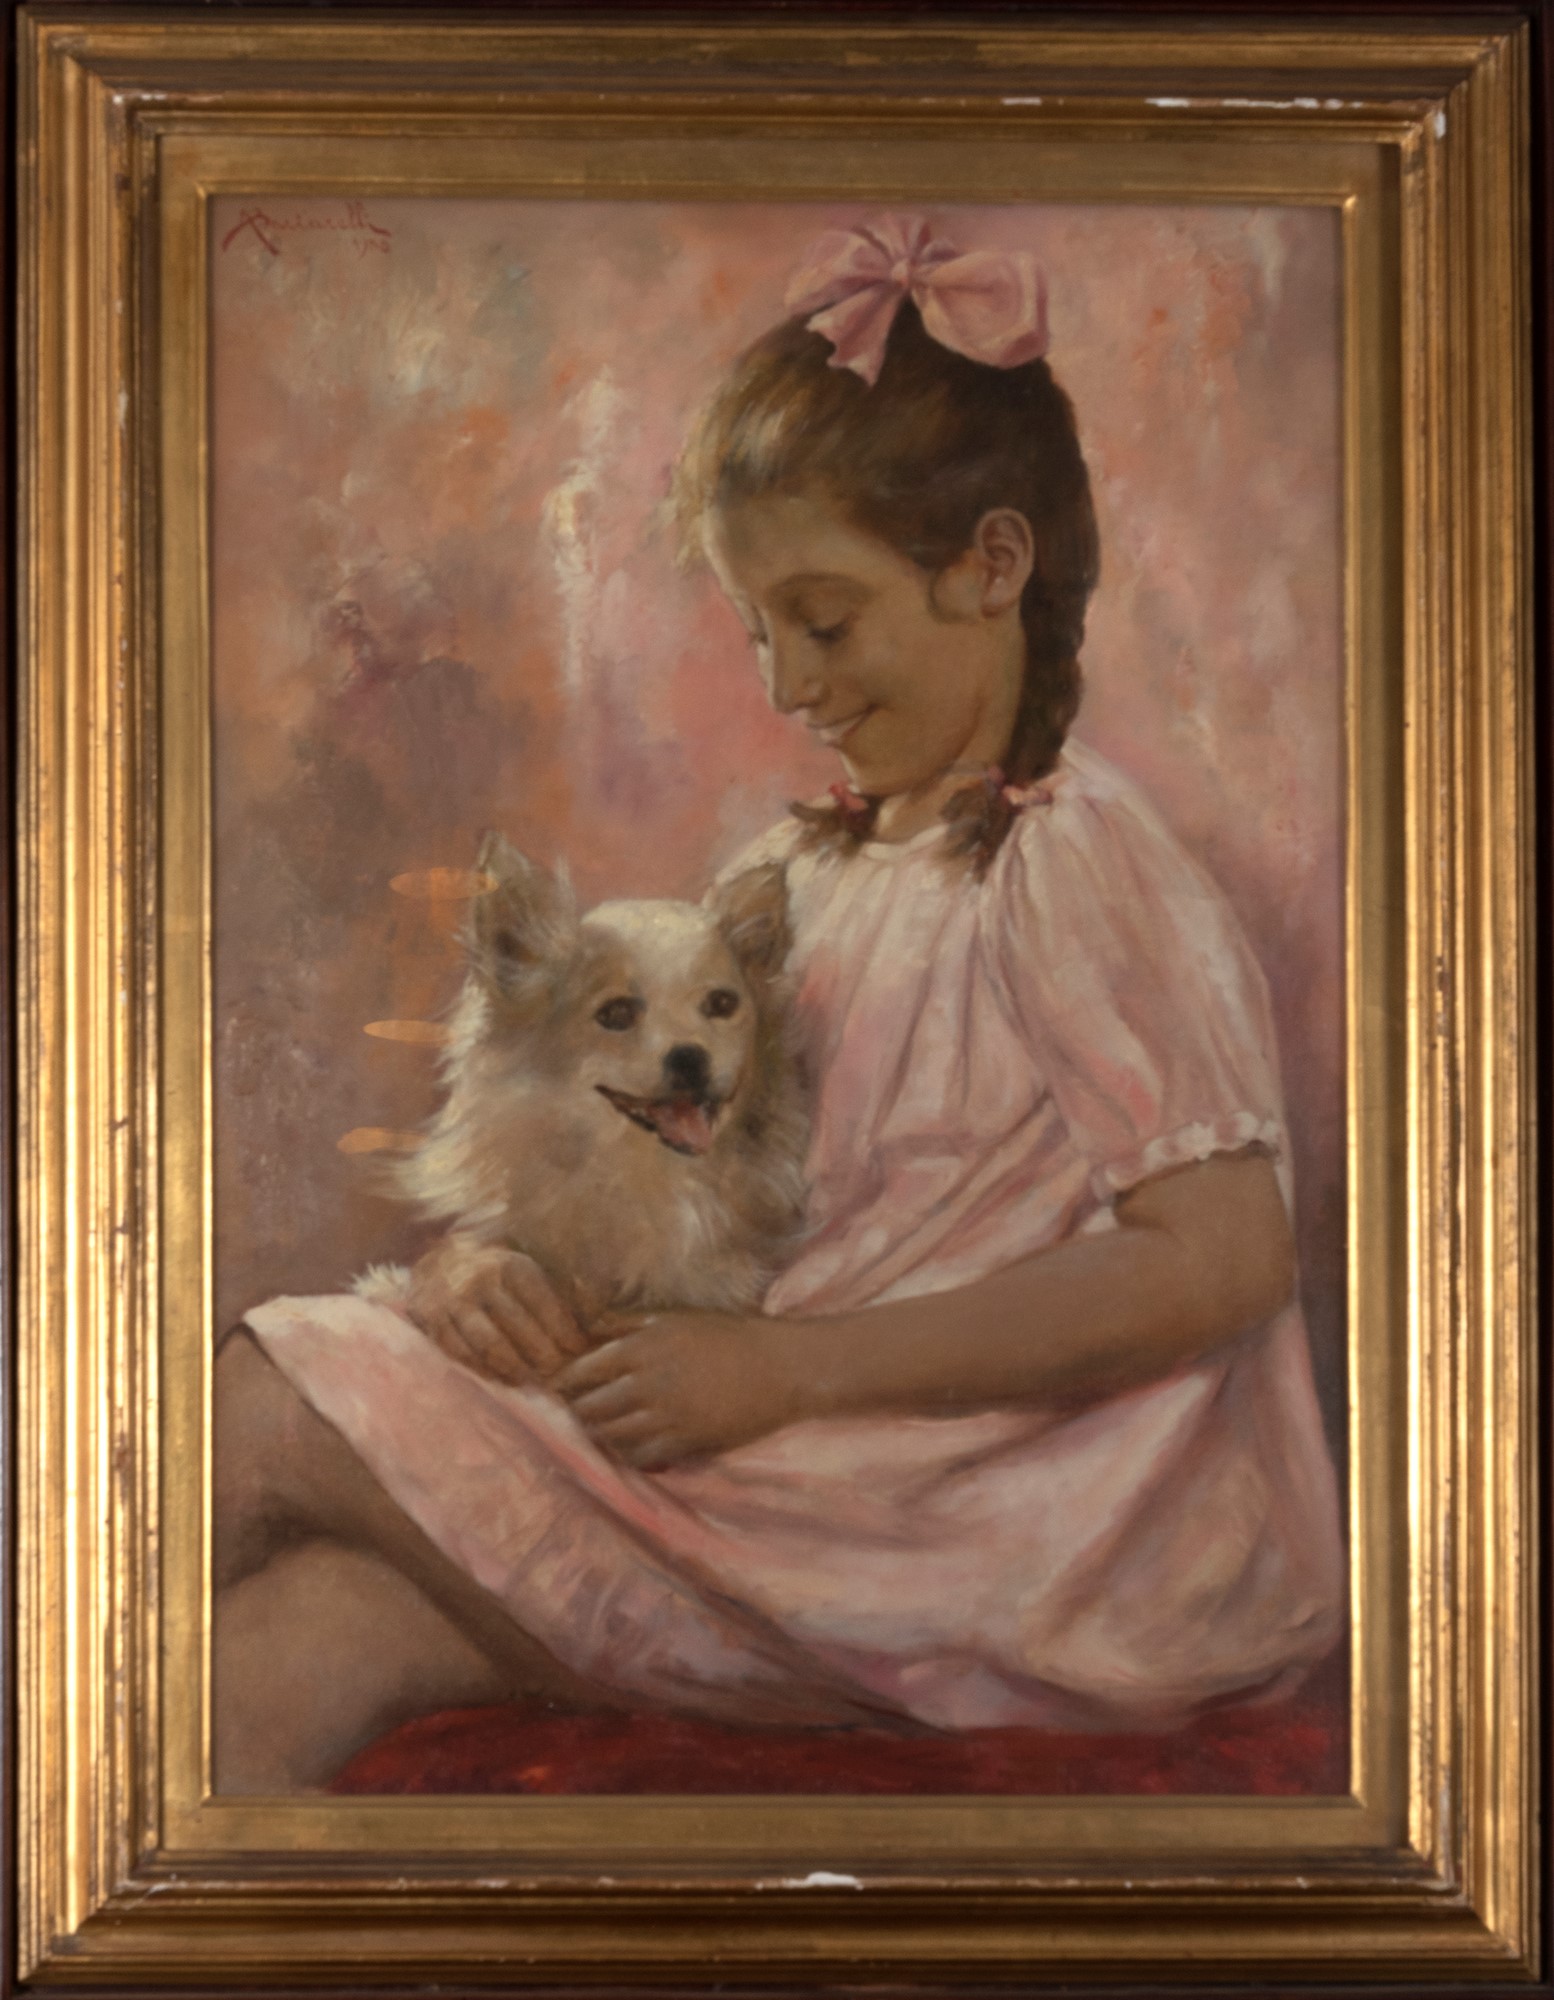 Scuola italiana, secolo XX - Portrait of a little girl with a little dog - Image 3 of 3